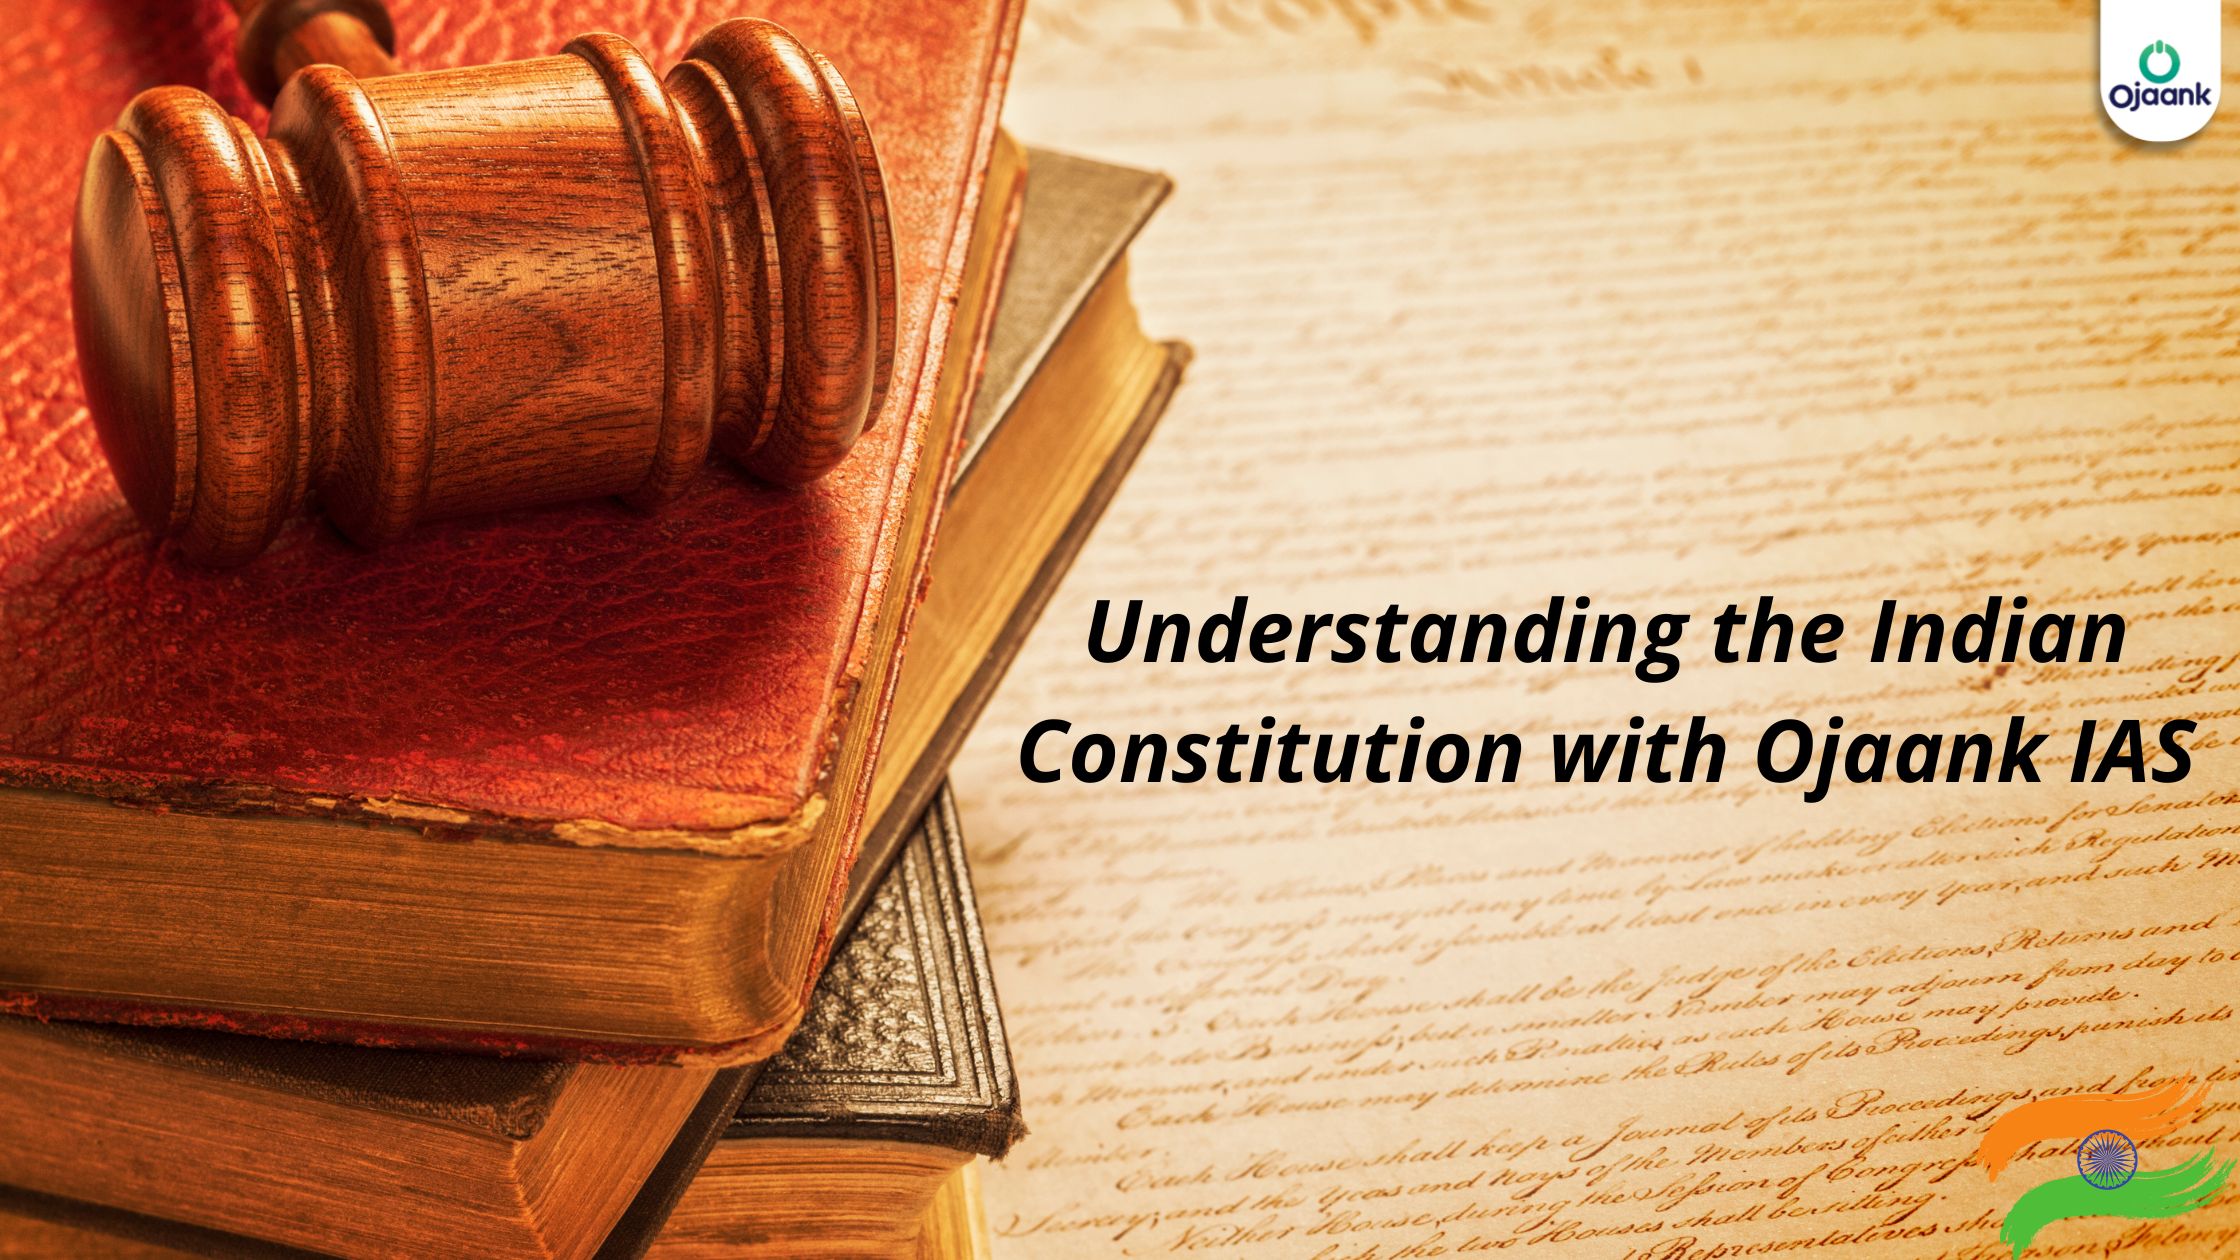 Understanding the Indian Constitution with Ojaank IAS